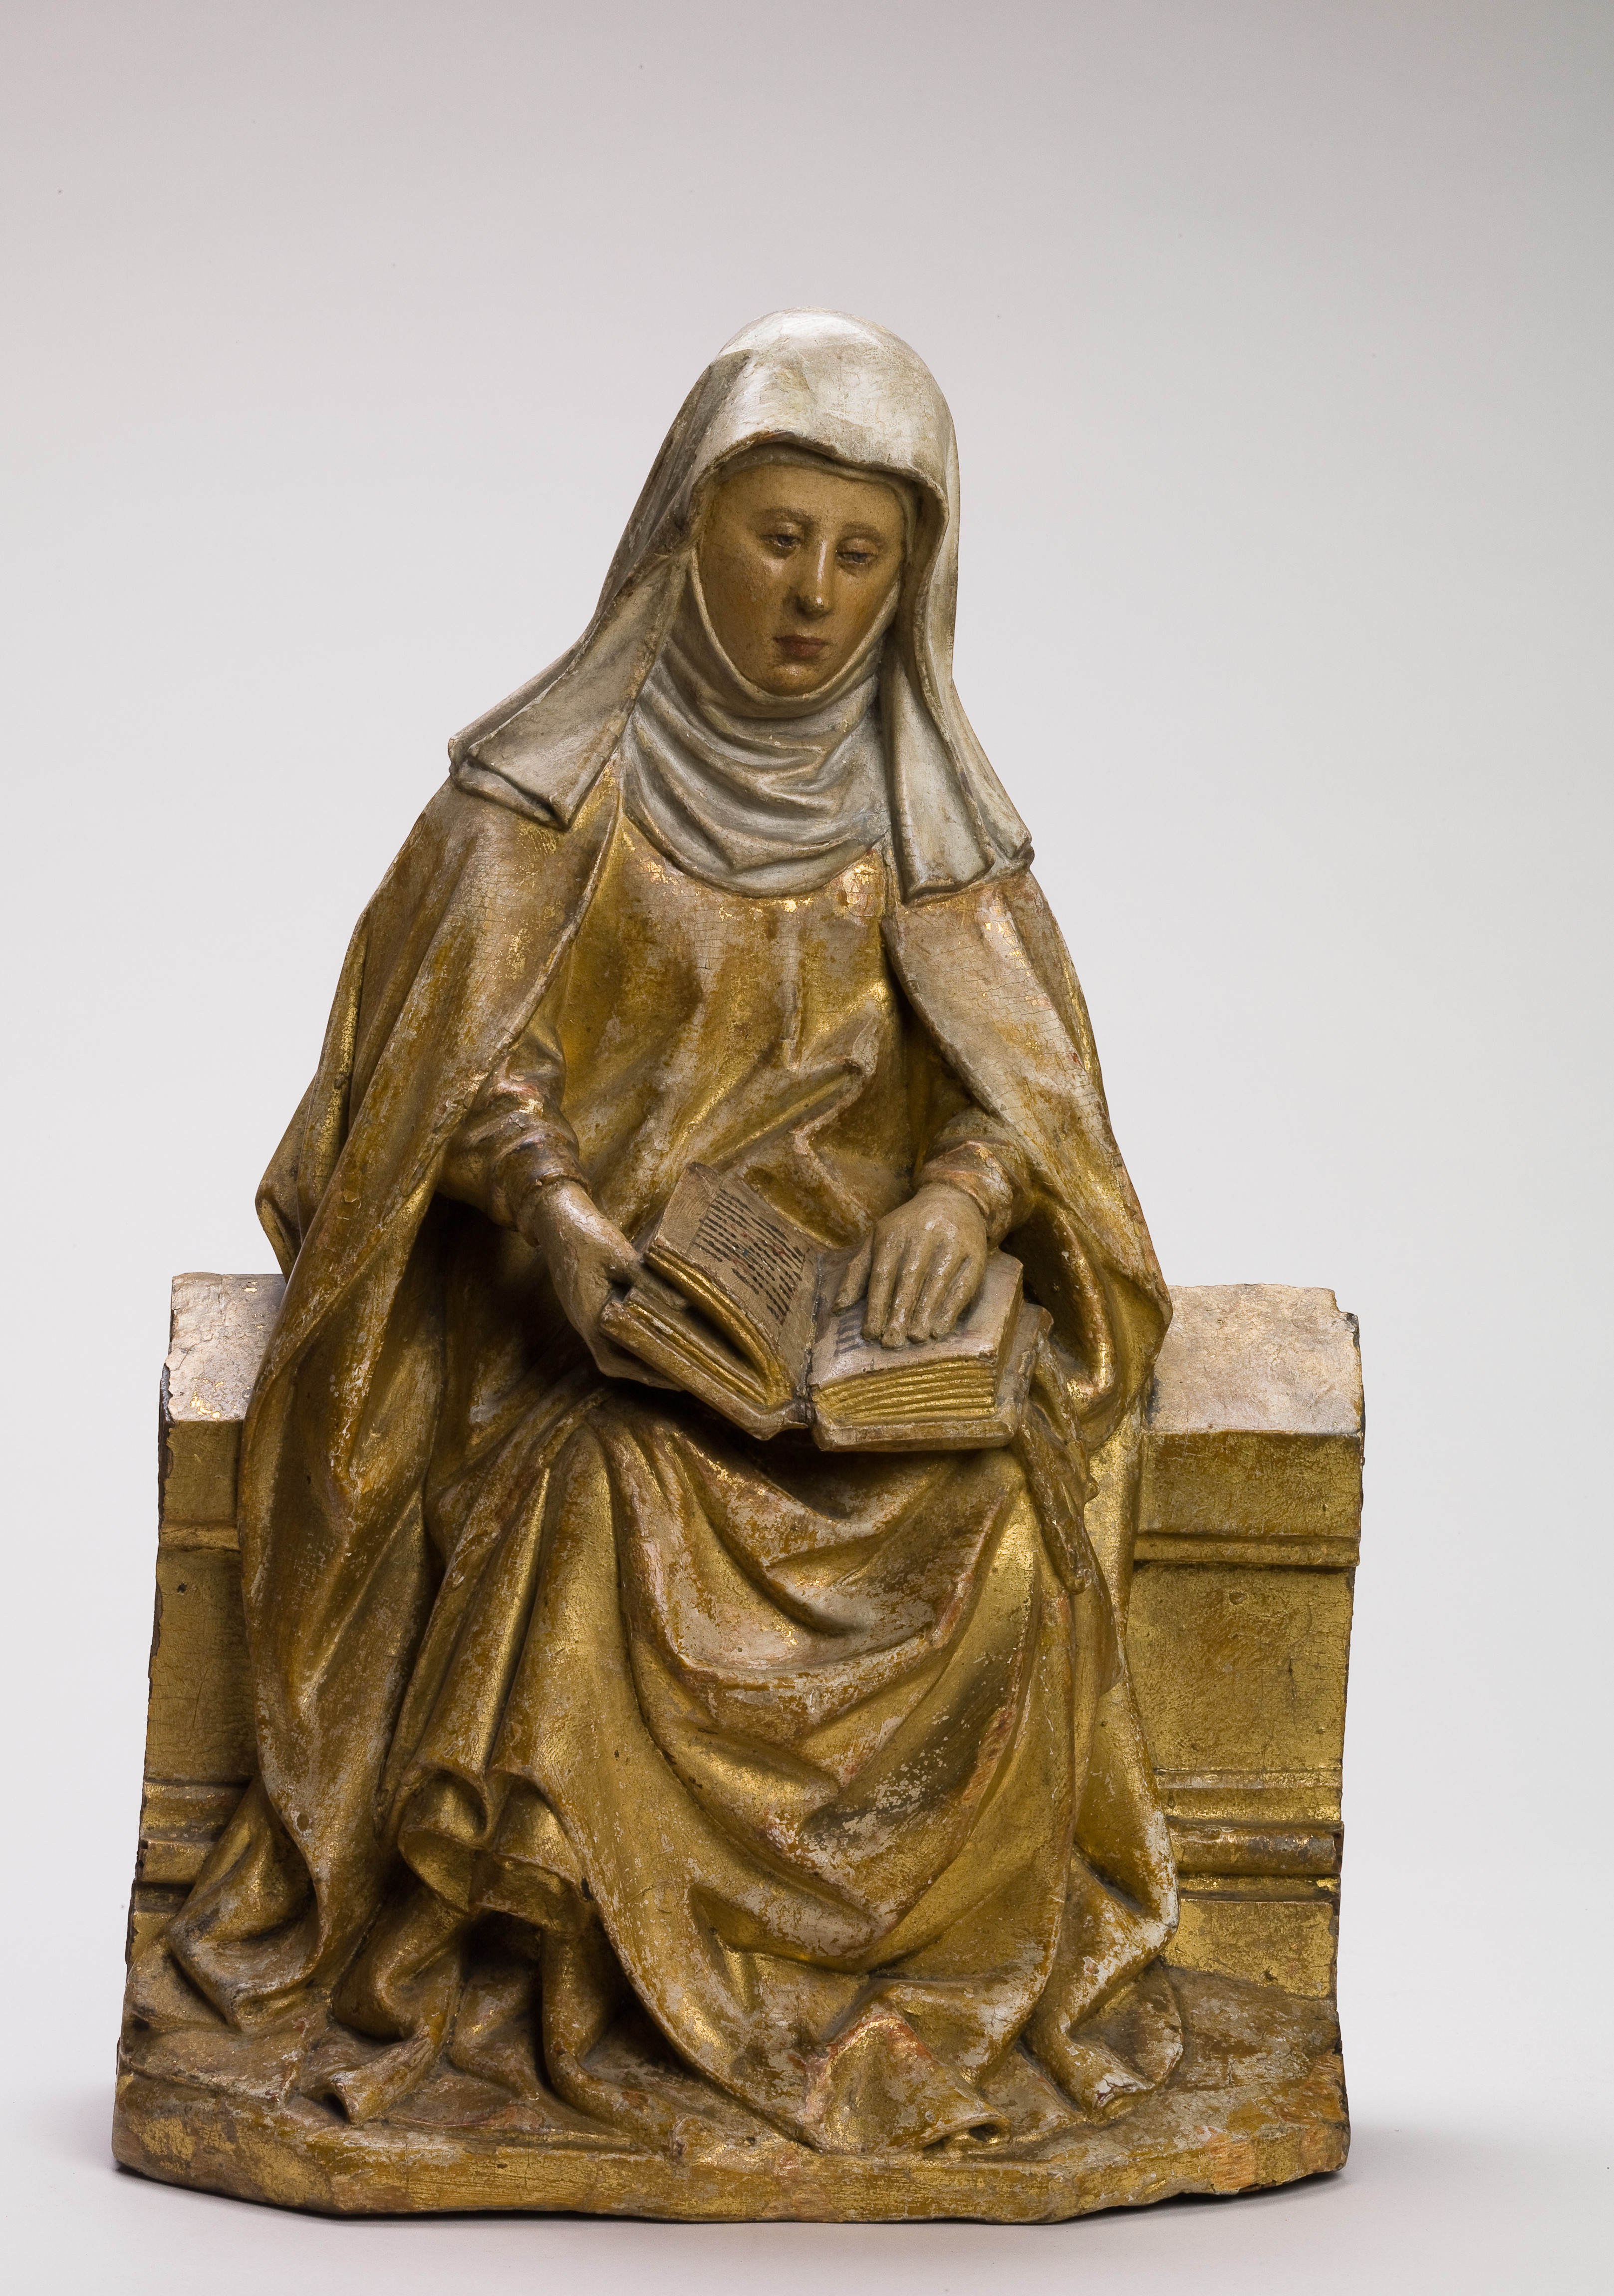 Wooden sculpture of a Saint sitting on a bench reading a book.